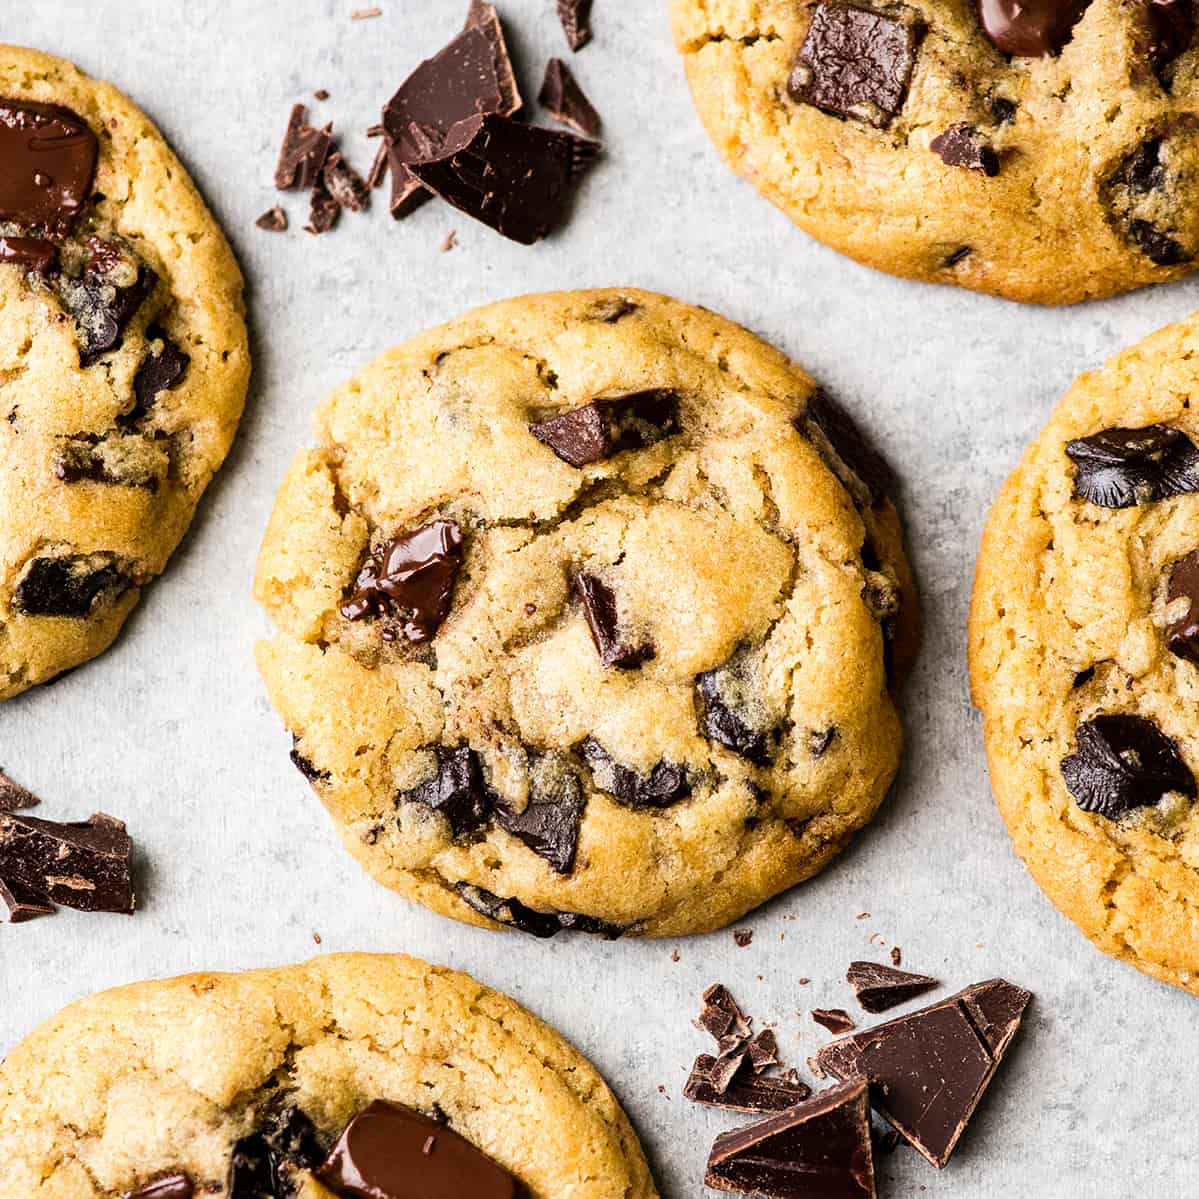 Overhead view of one chocolate chip cookie surrounded by four other chocolate chip cookies and chopped chocolate